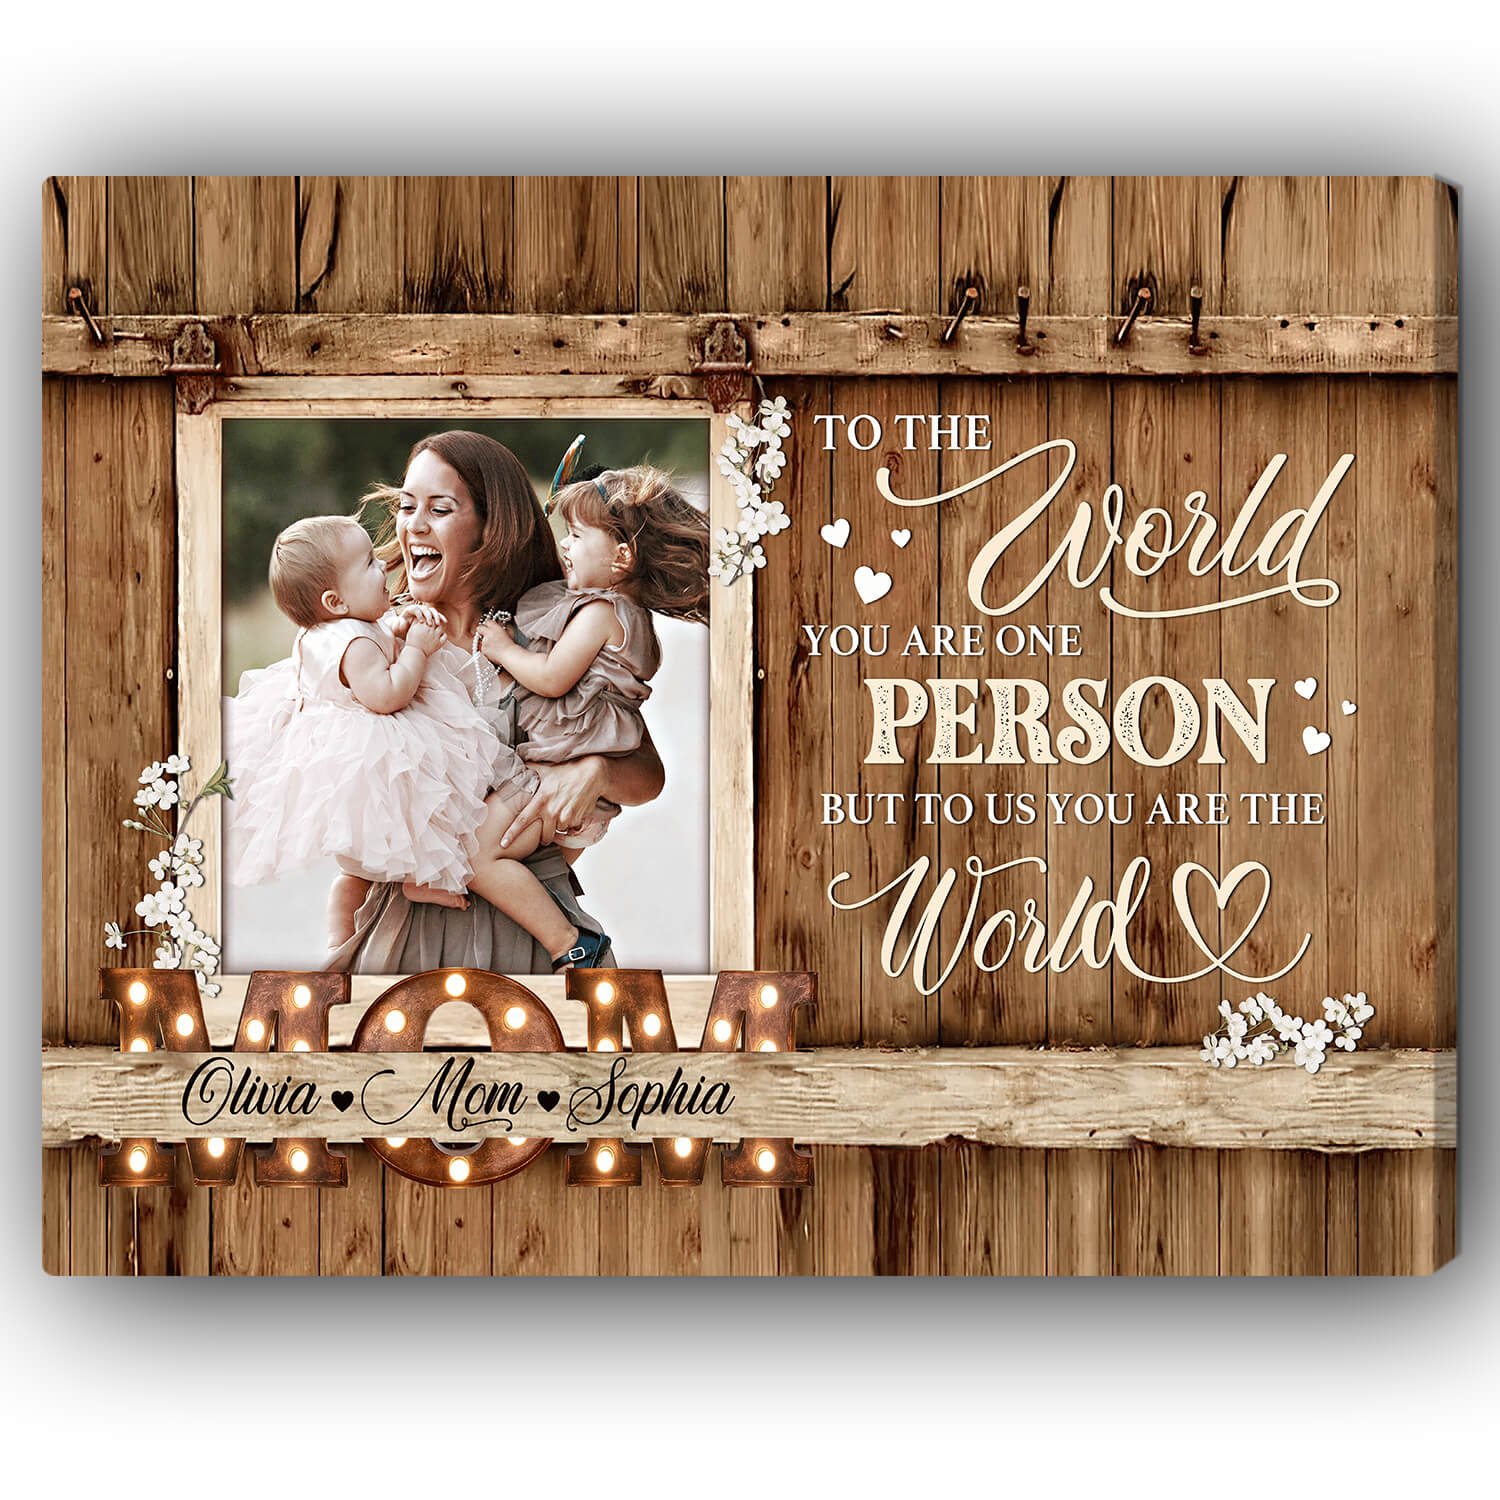 Sentimental Gift for Mom Mother's Day, Gifts for Mom from Daughter/Son,  Wood Sign, Gift Wood Heart, Wood Signs Quote for Crafts, You Are The Mom